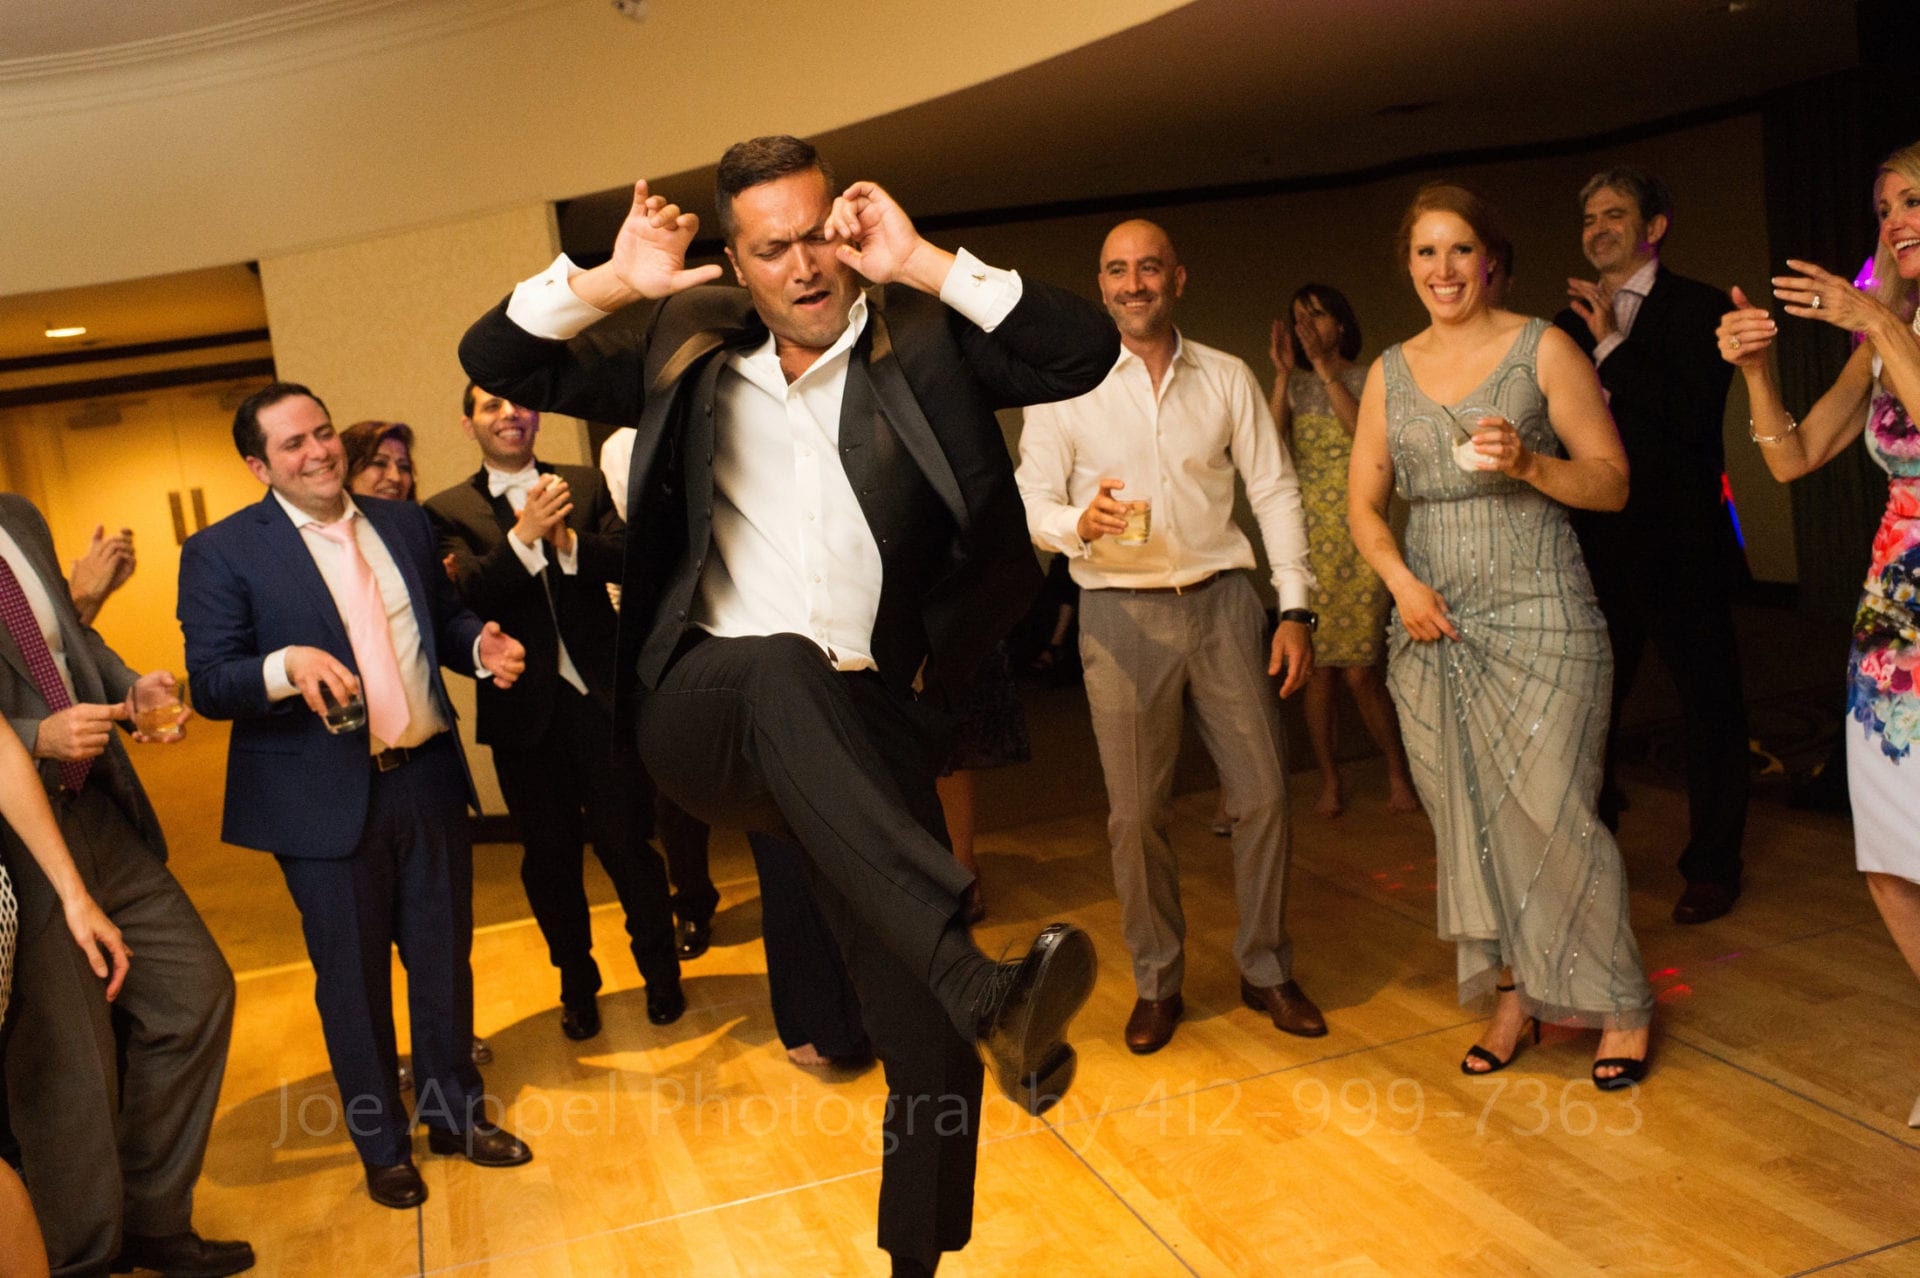 a man in a suit dances as guests laugh and watch